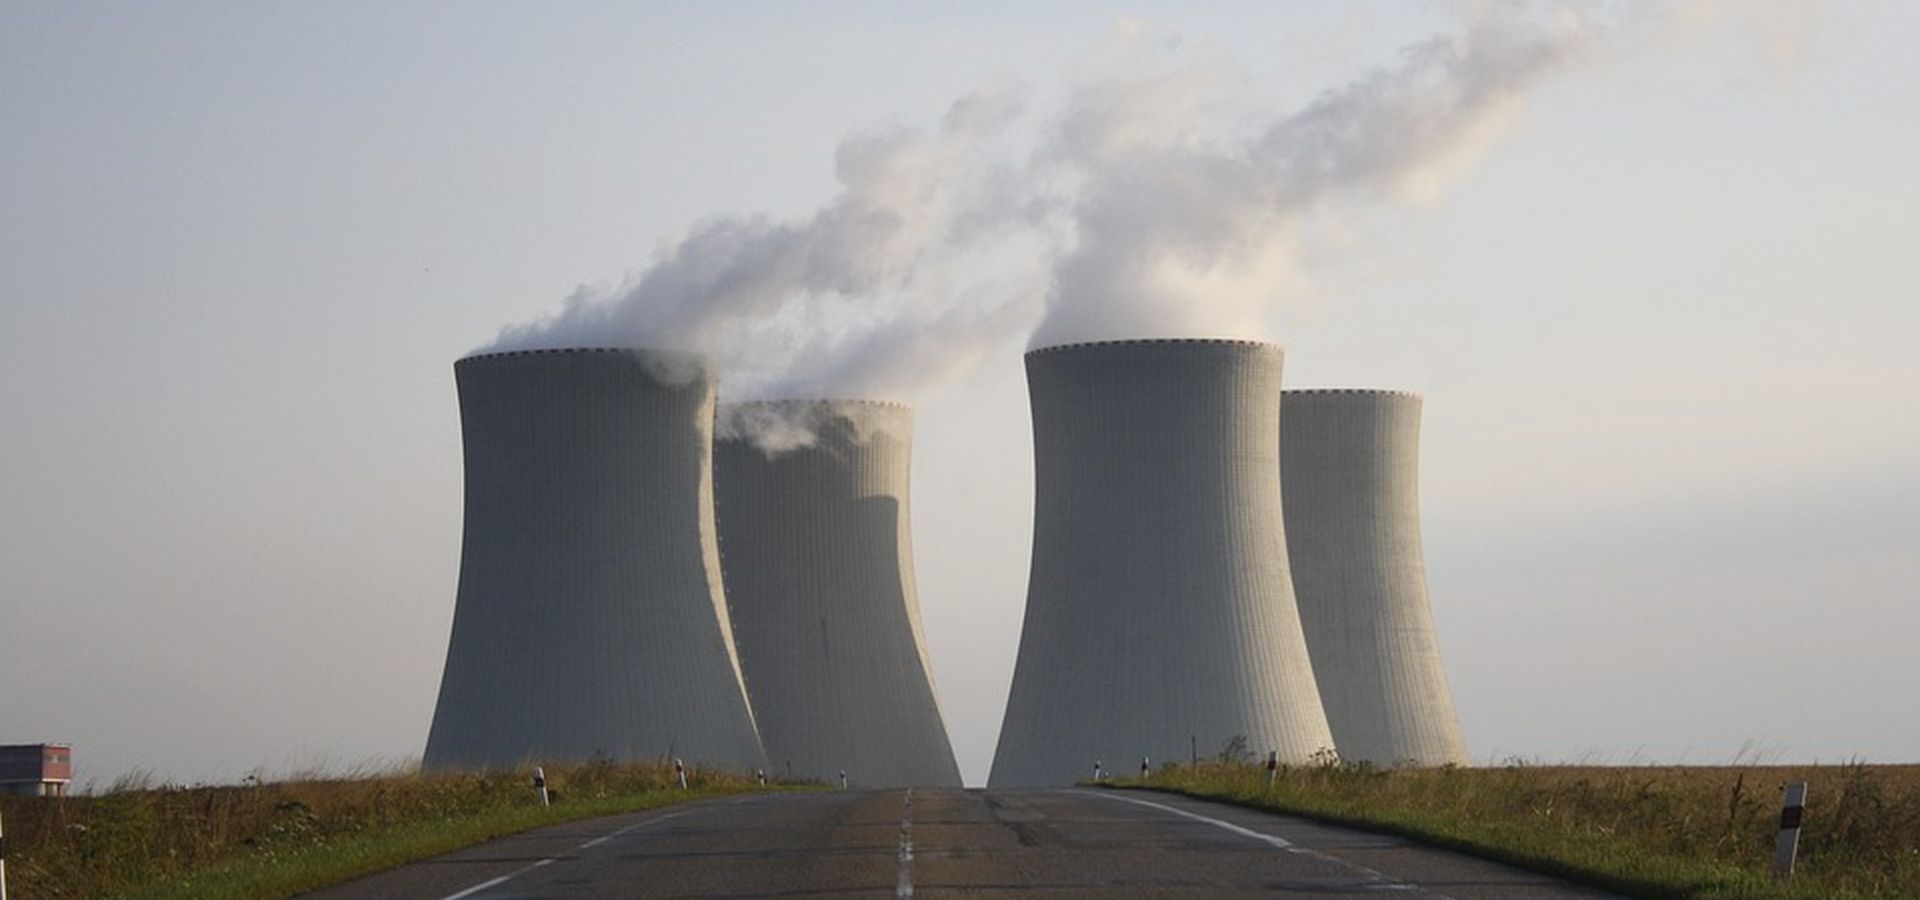 The new government of Czech Republic wants to build new power plants